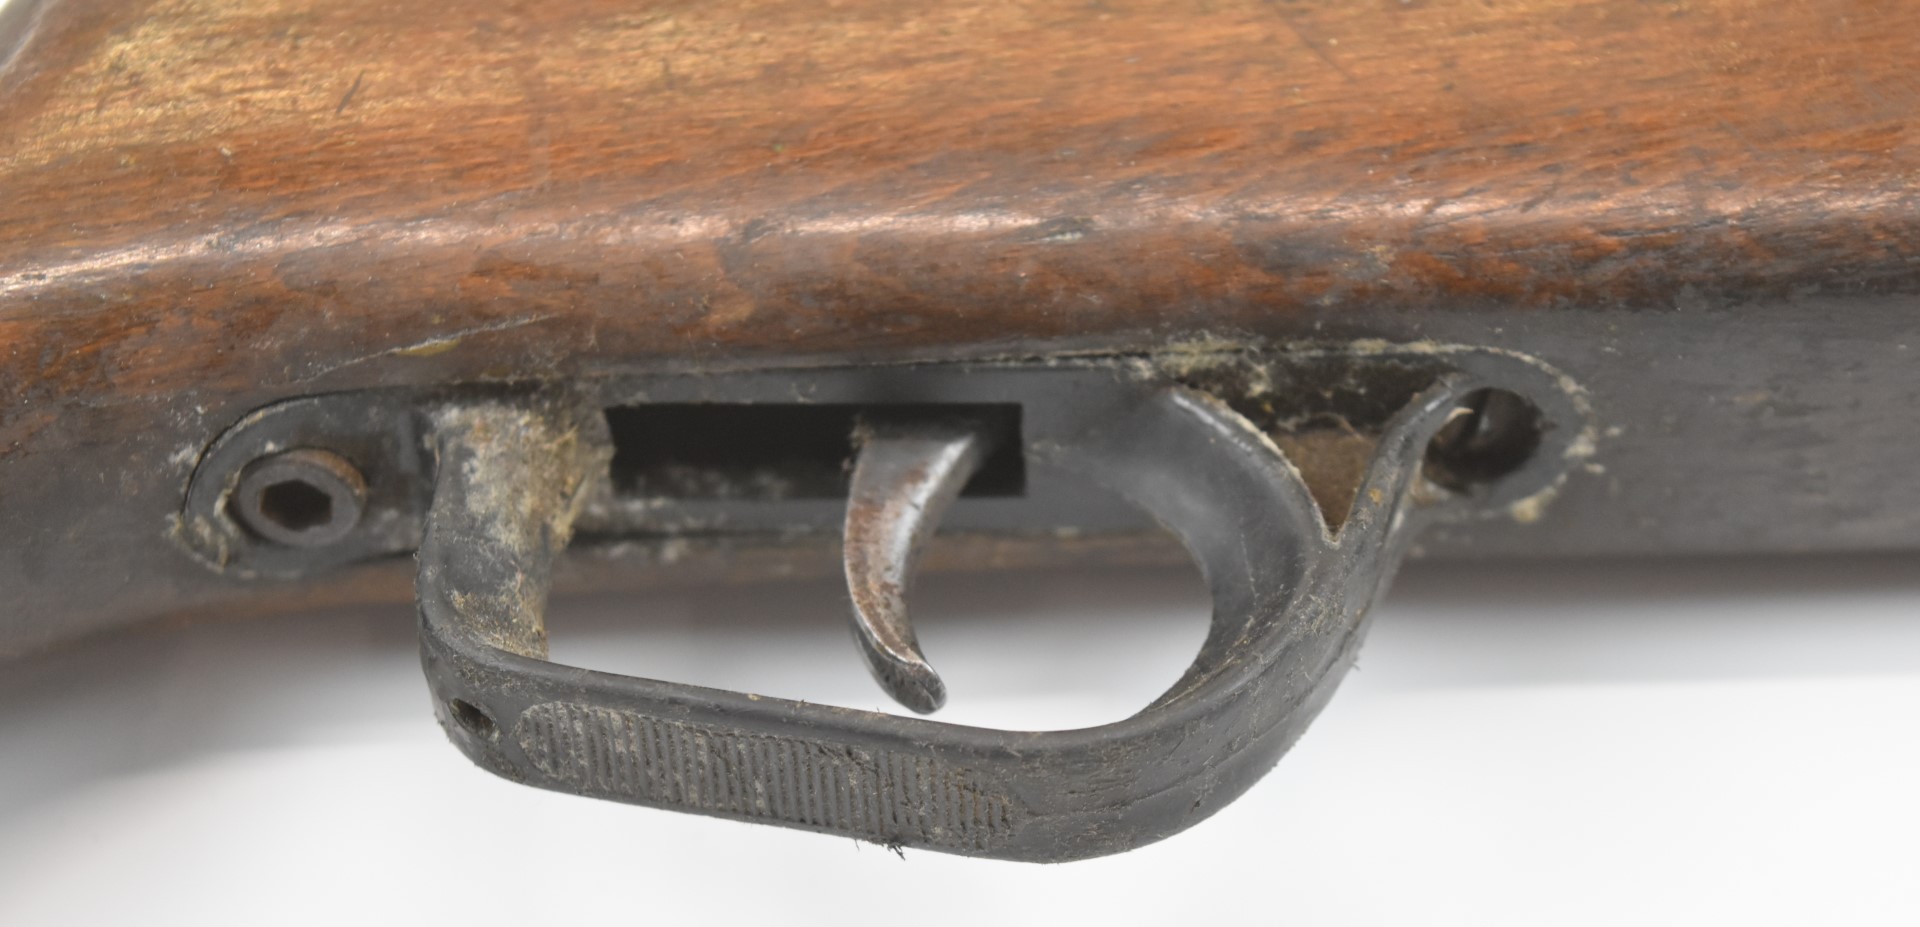 Gamo .22 air rifle with semi-pistol grip and adjustable sights, serial number T68059. - Image 9 of 16